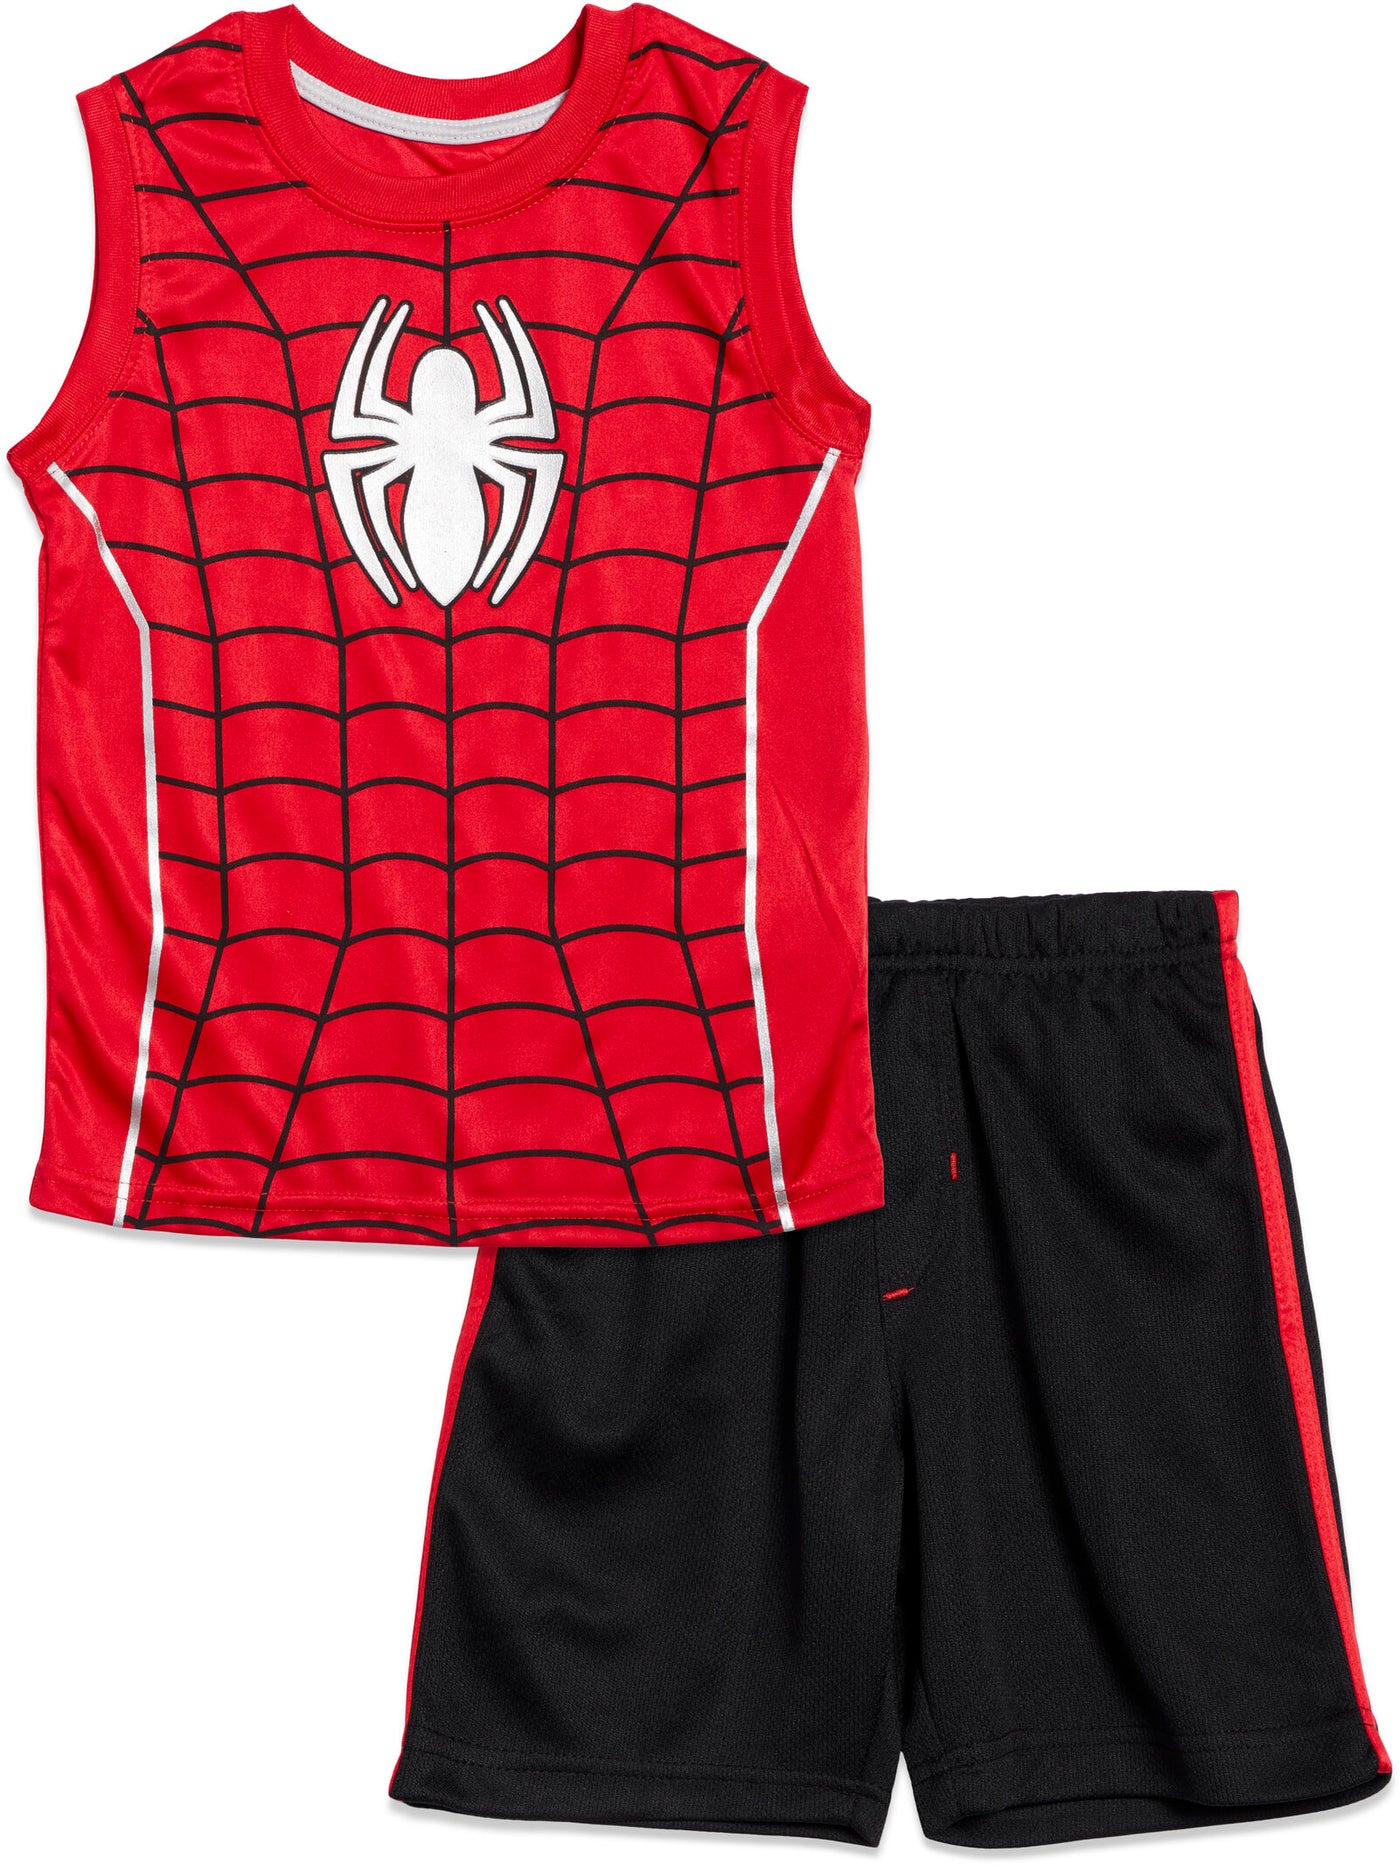 Marvel Avengers Spider-Man Tank Top and Mesh Shorts